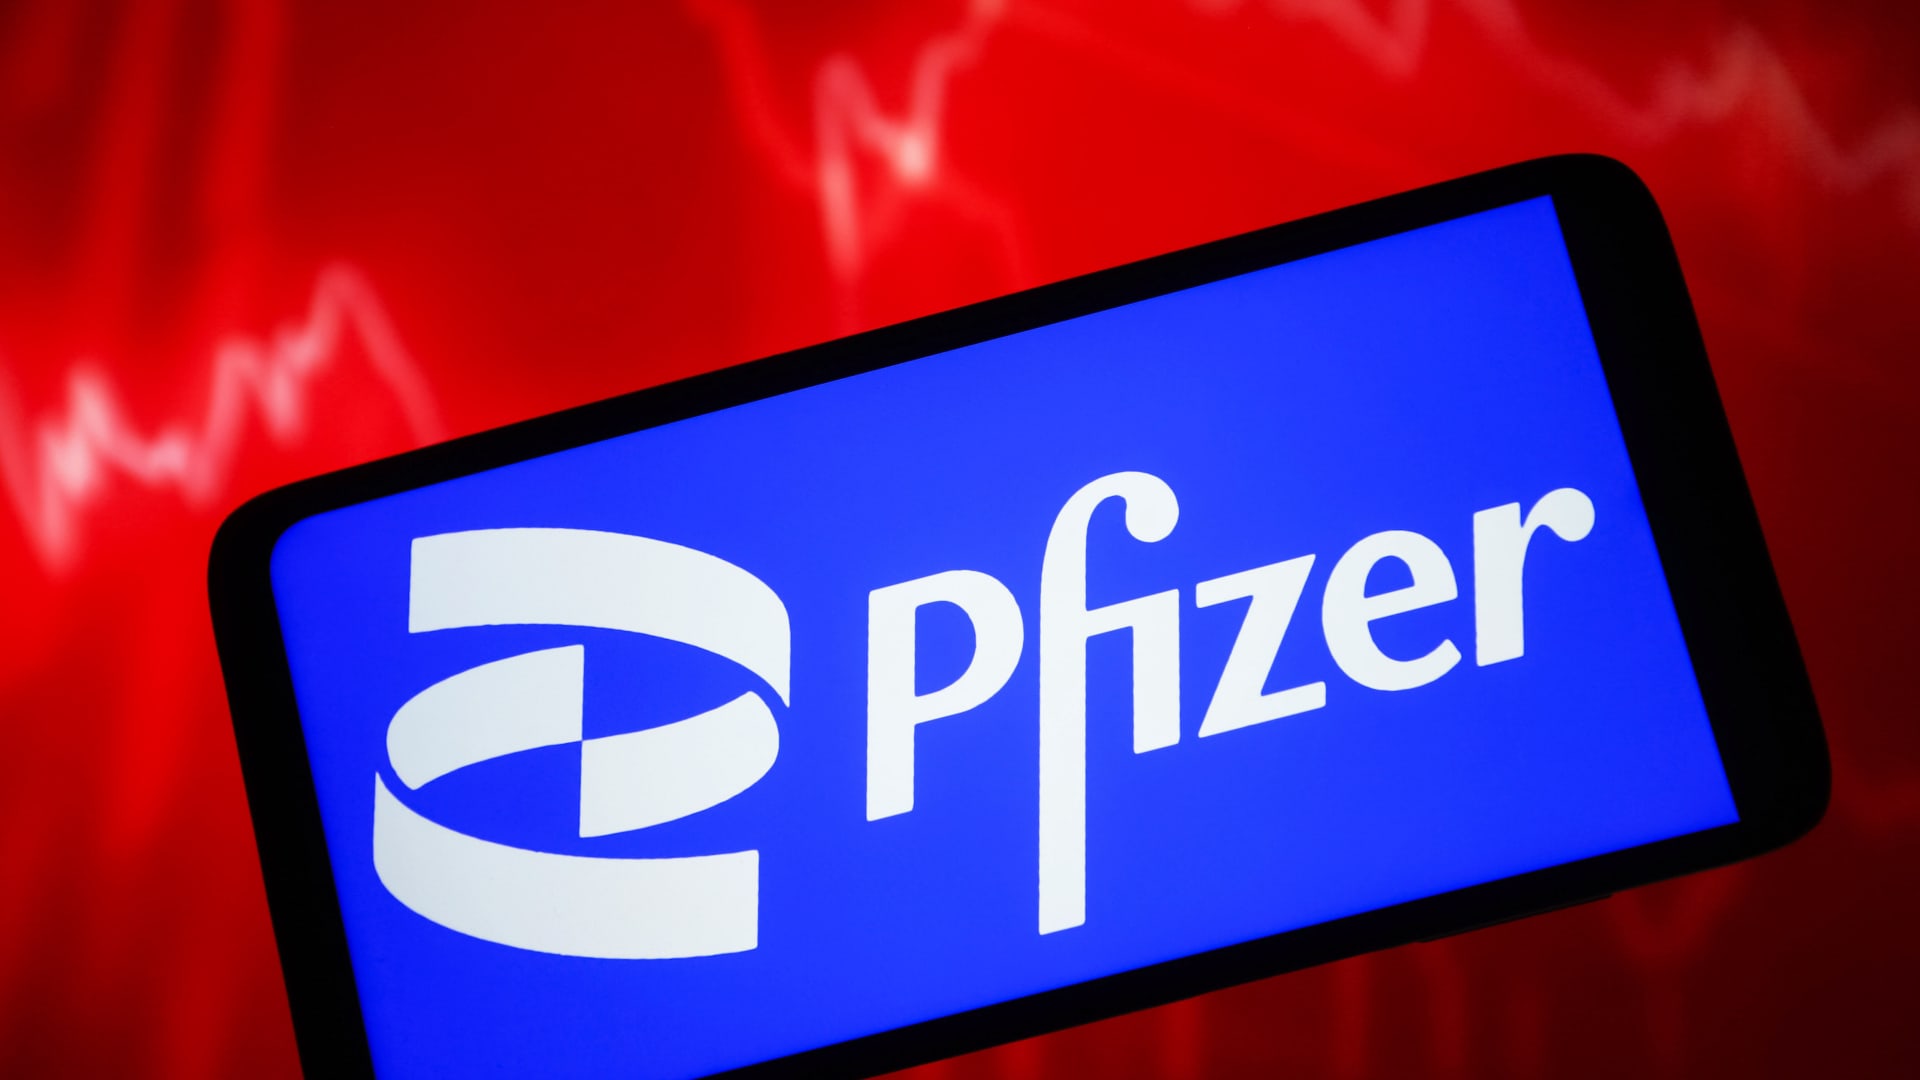 FDA approves Pfizer gene therapy Beqvez for treatment of hemophilia B [Video]